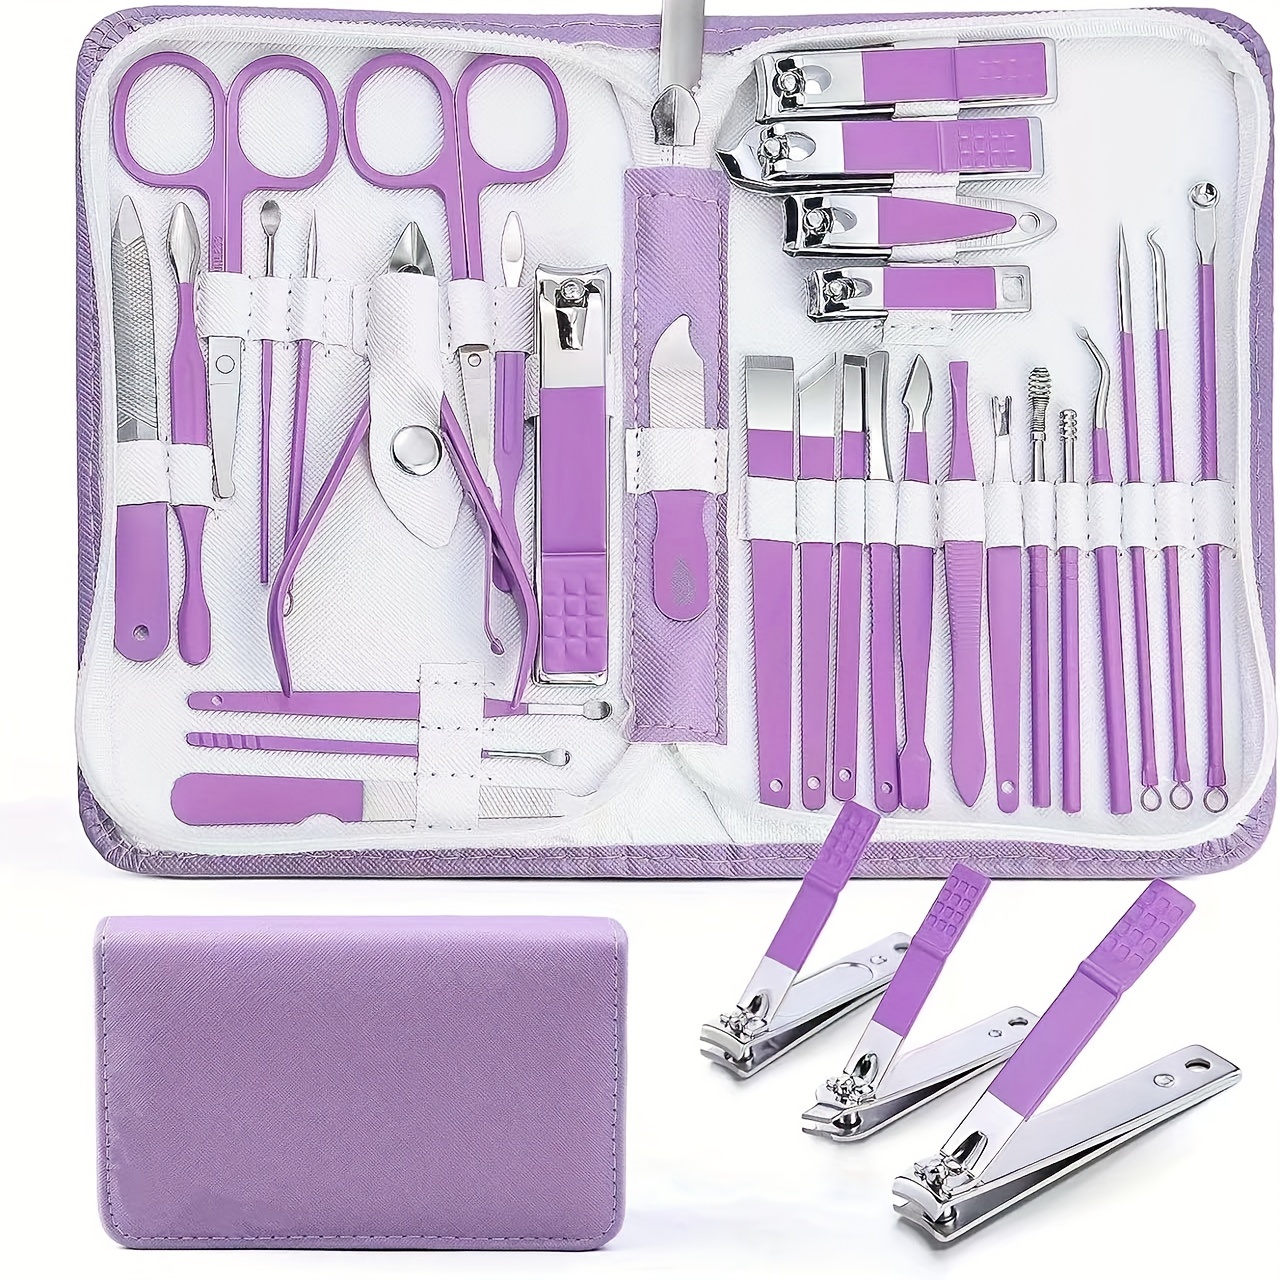 

30pcs/set Nail Clippers Manicure Tool Set, With Portable Travel Case, Cuticle Nippers And Cutter Kit, Professional Nail Clippers Pedicure Kit, Grooming Kit For Travel